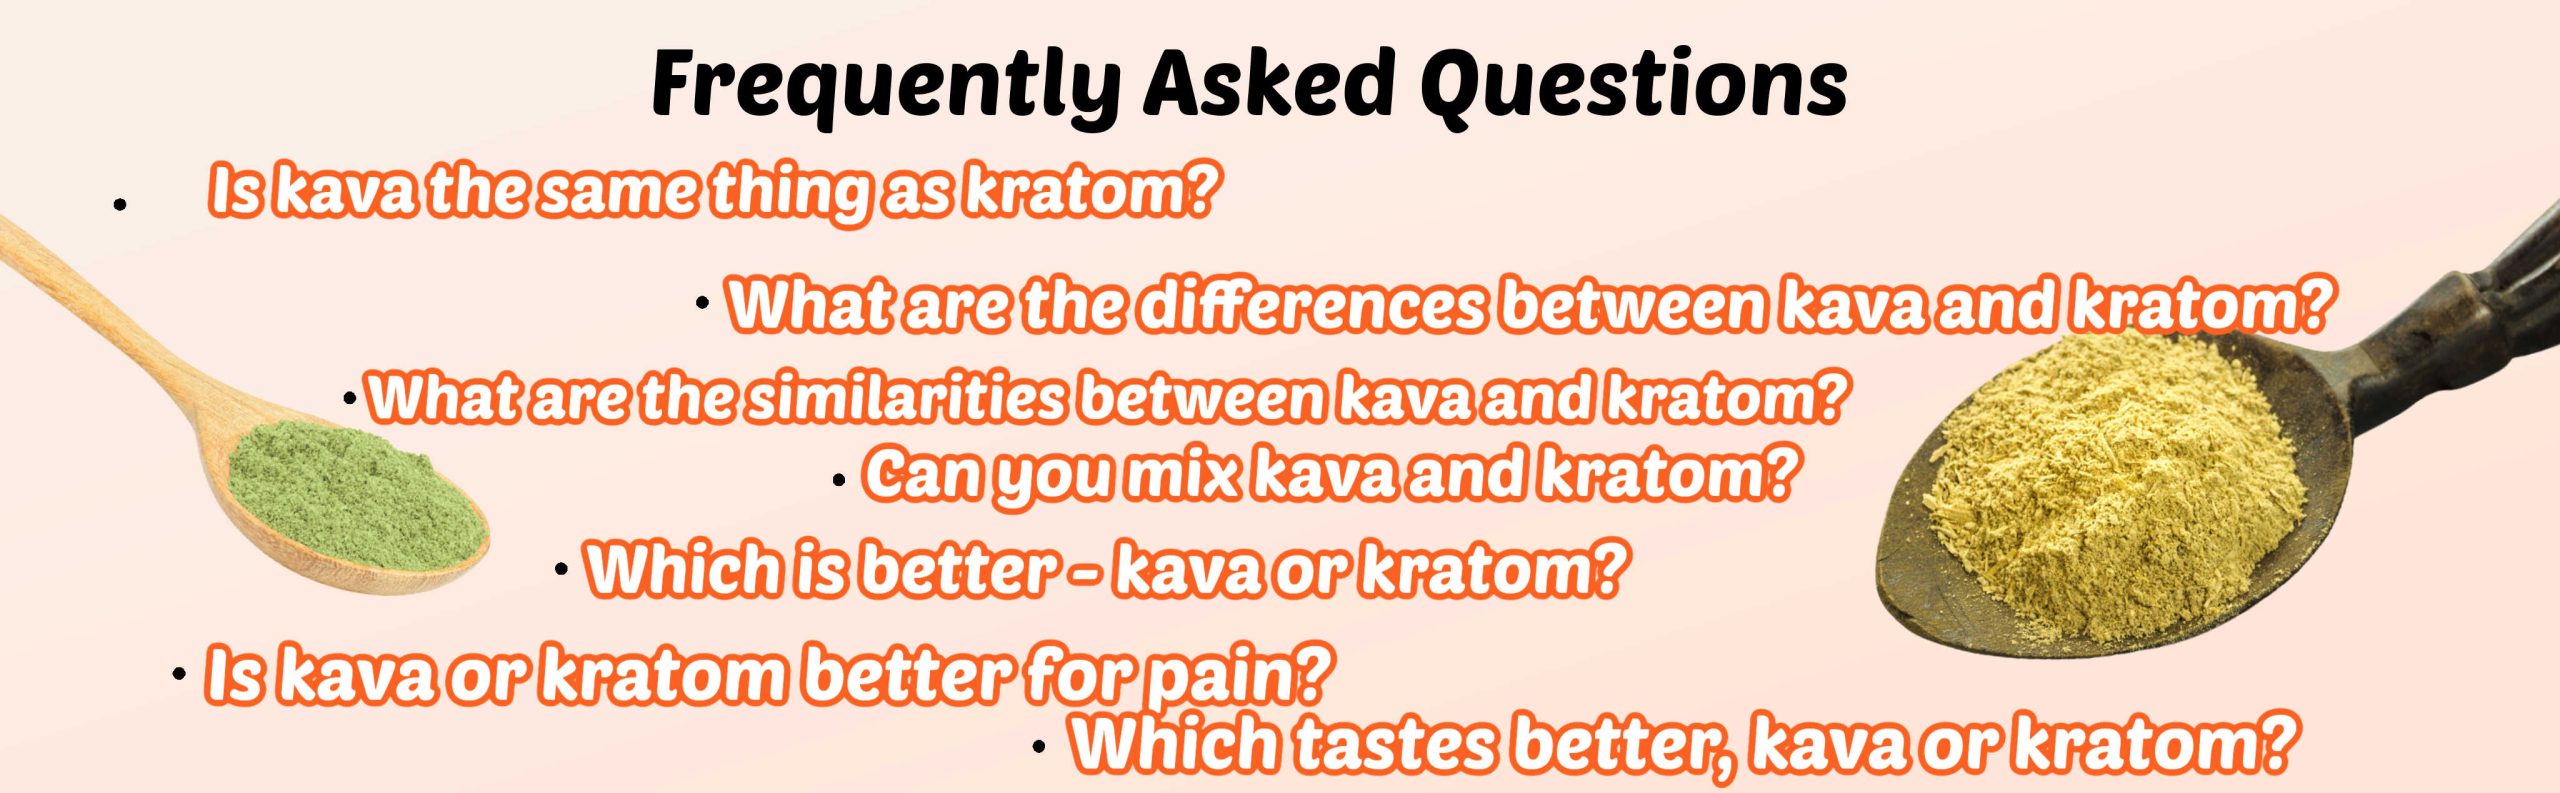 image of frequently asked questions about kratom and kava